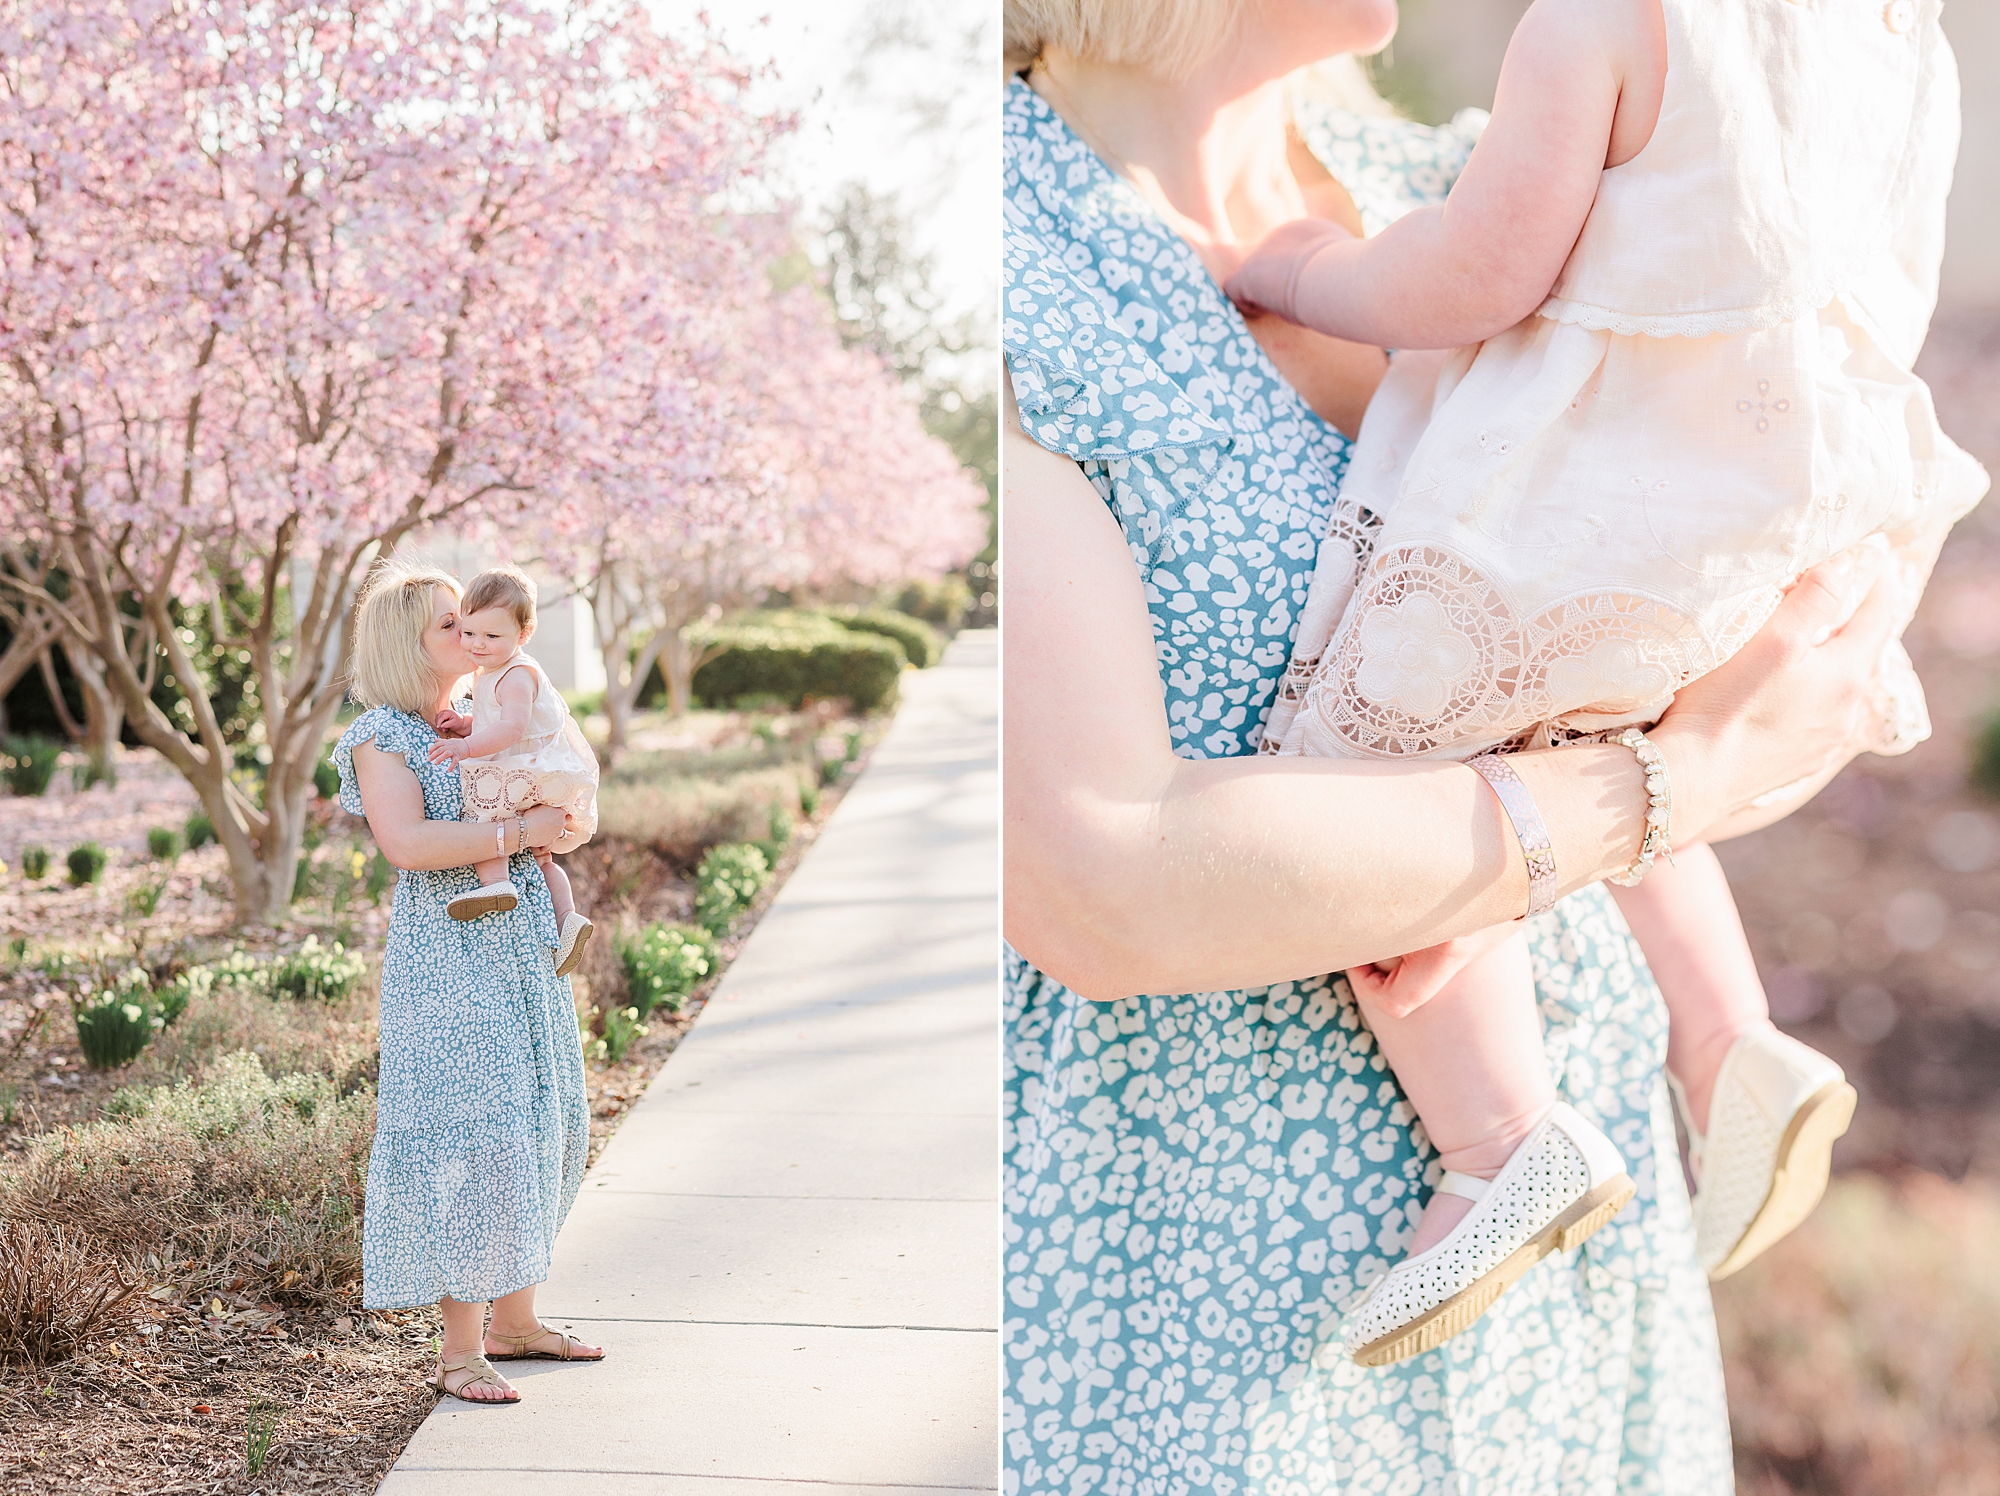 mom holds daughter in pink dress while wearing blue dress